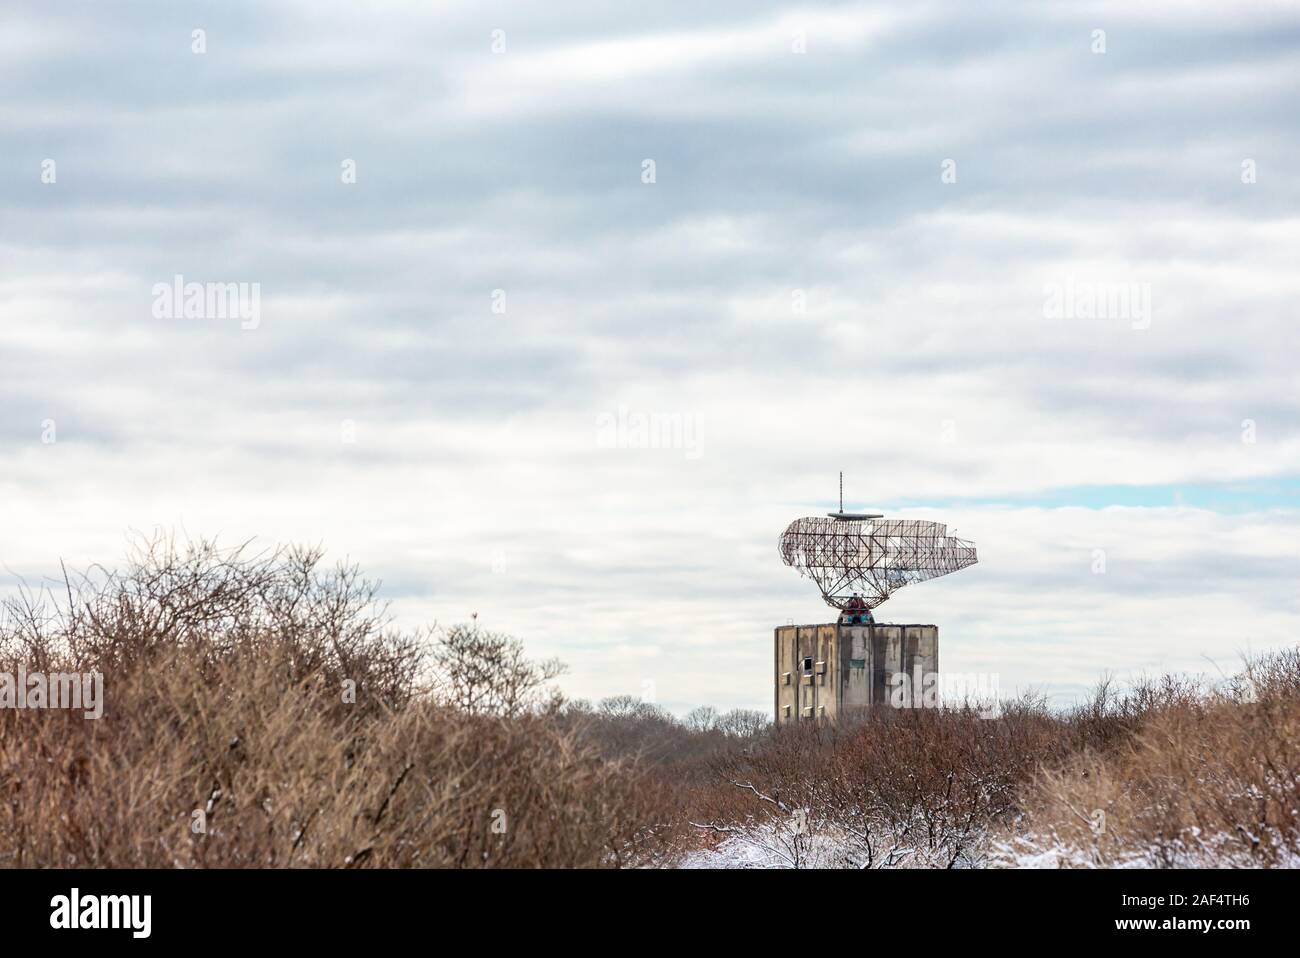 Winter landscape with old radar tower in Montauk, NY Stock Photo